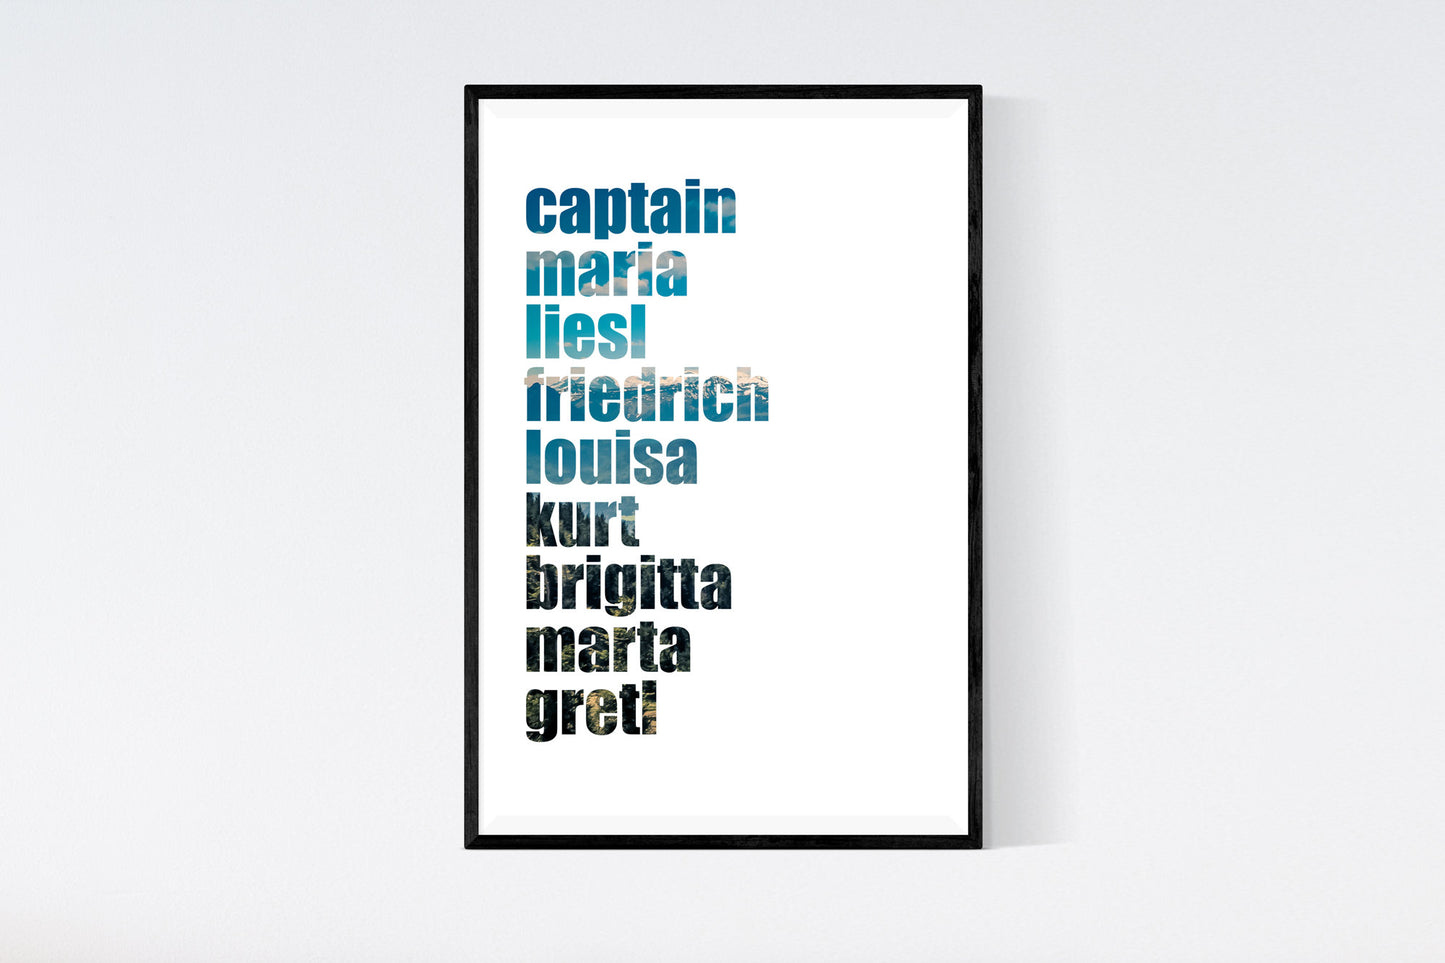 Poster featuring names of the characters from The Sound of Music: Captain, Maria, Liesl, Friedrich, Louisa, Kurt, Brigitta, Marta, and Gretl